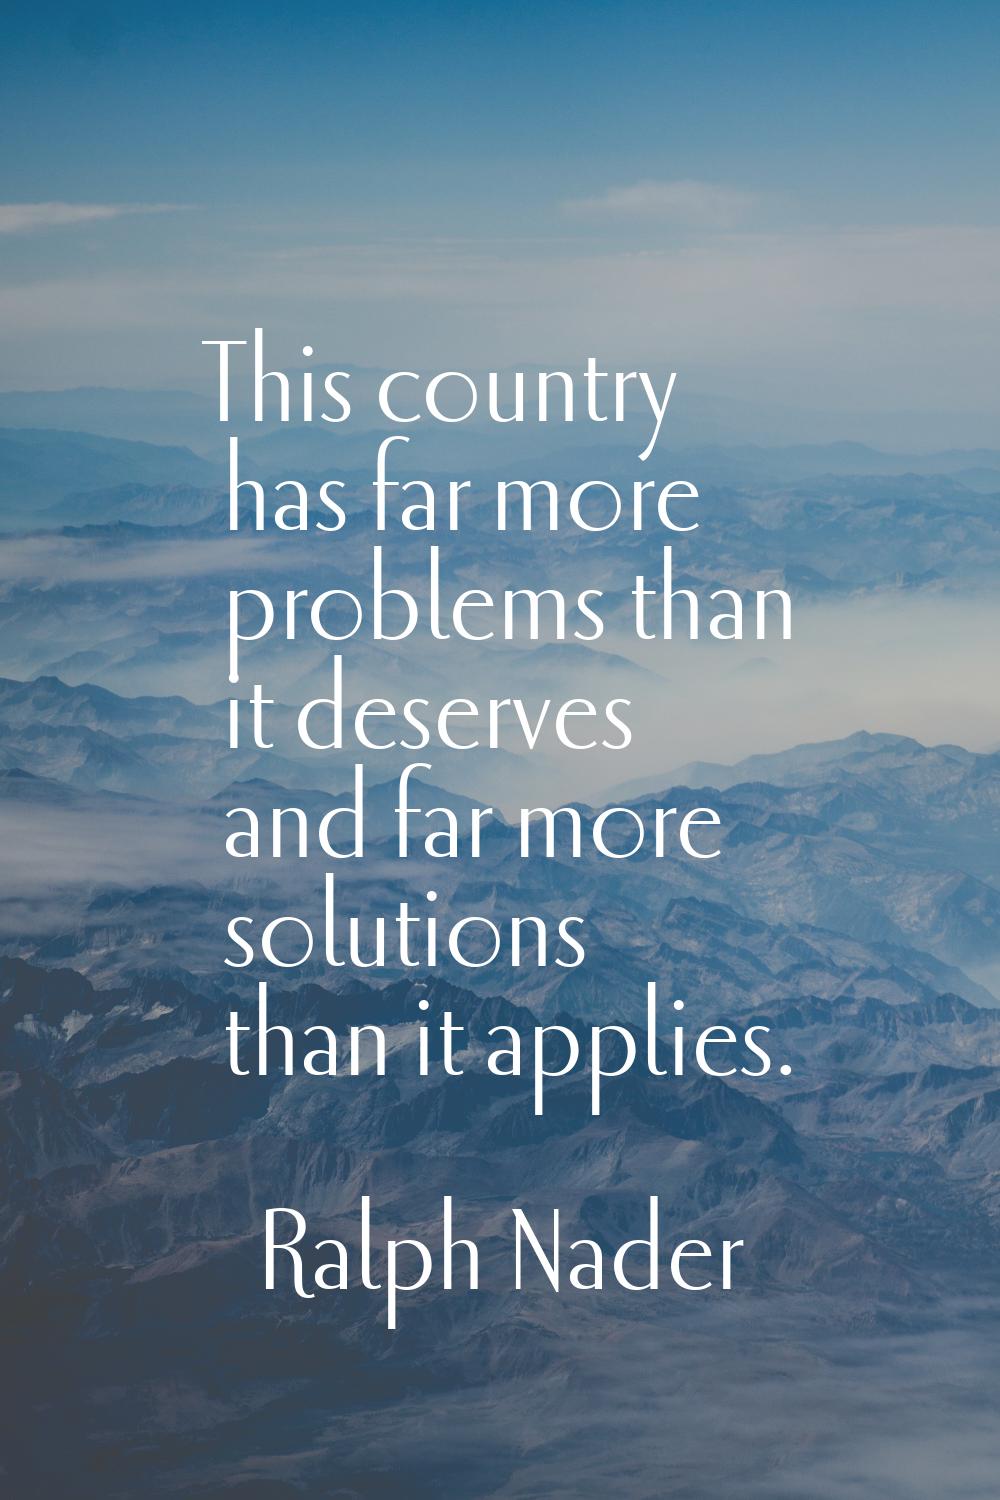 This country has far more problems than it deserves and far more solutions than it applies.